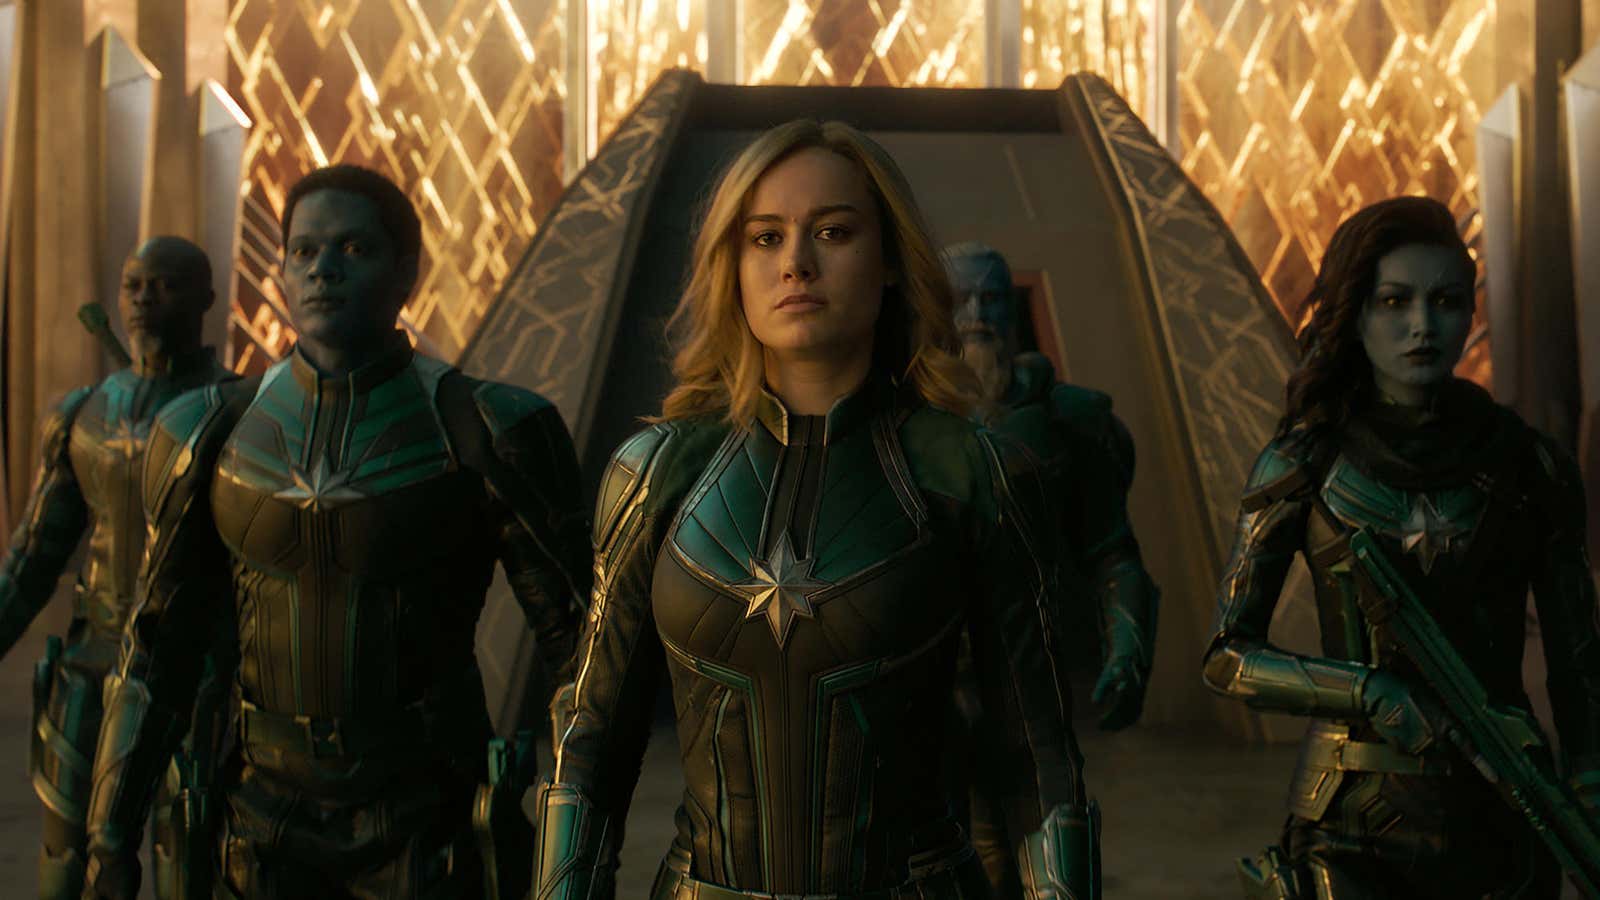 Captain Marvel is a strong female superhero with a complicated past.